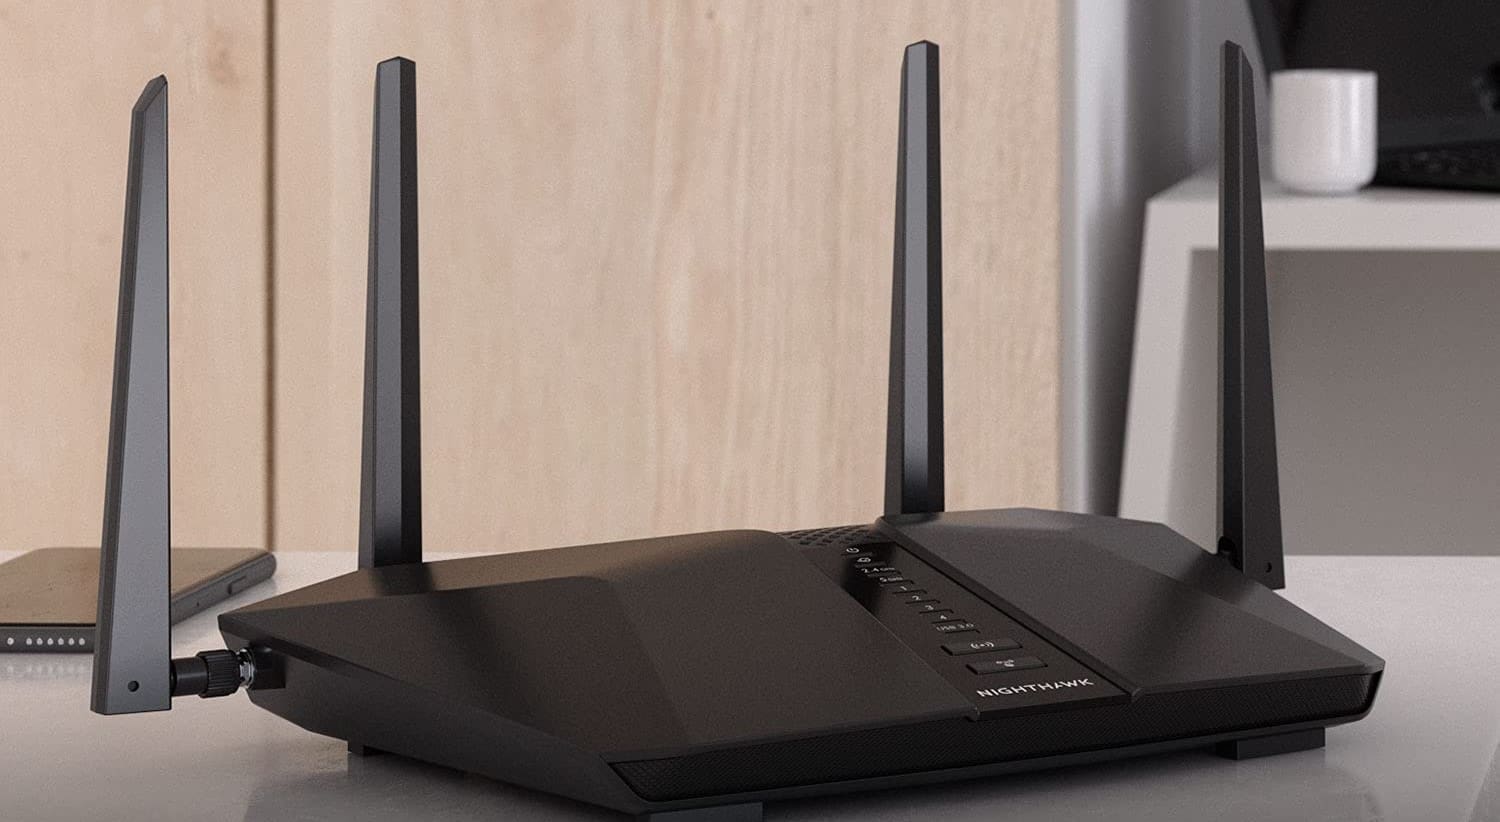 How to Turn an Old Router into an Access Point